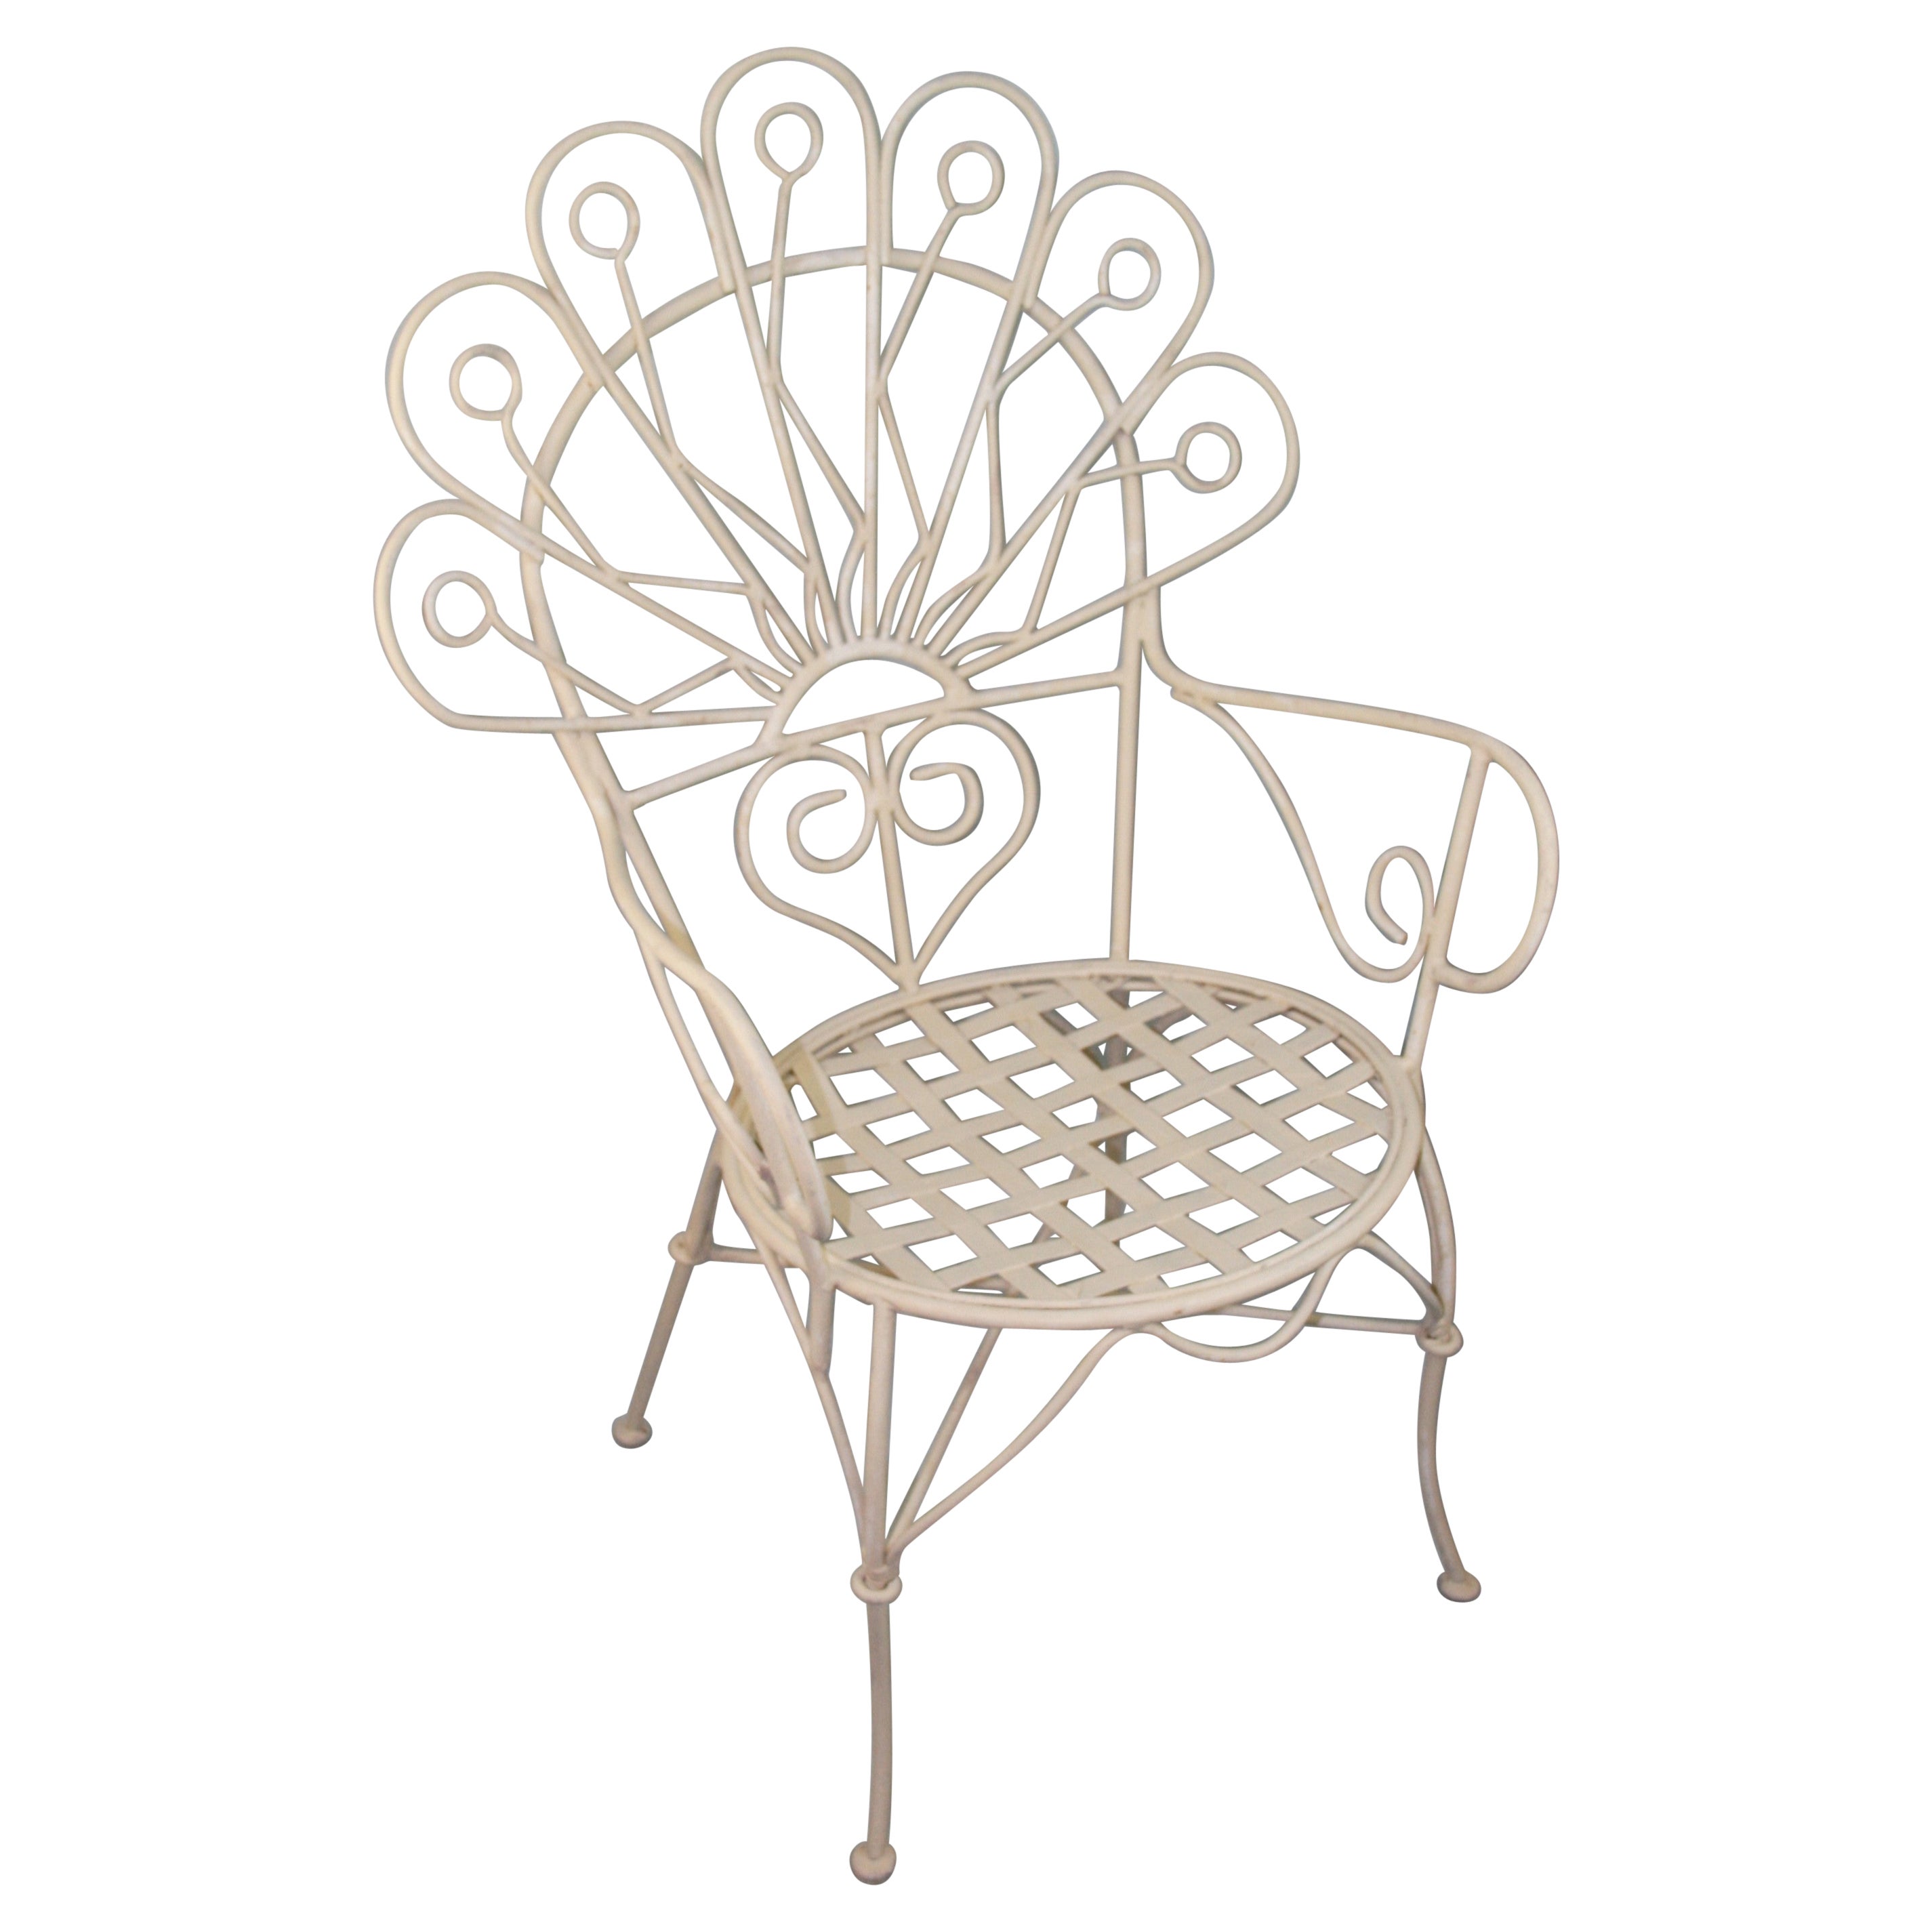 Pair Peacock Metal Garden Chairs For Sale